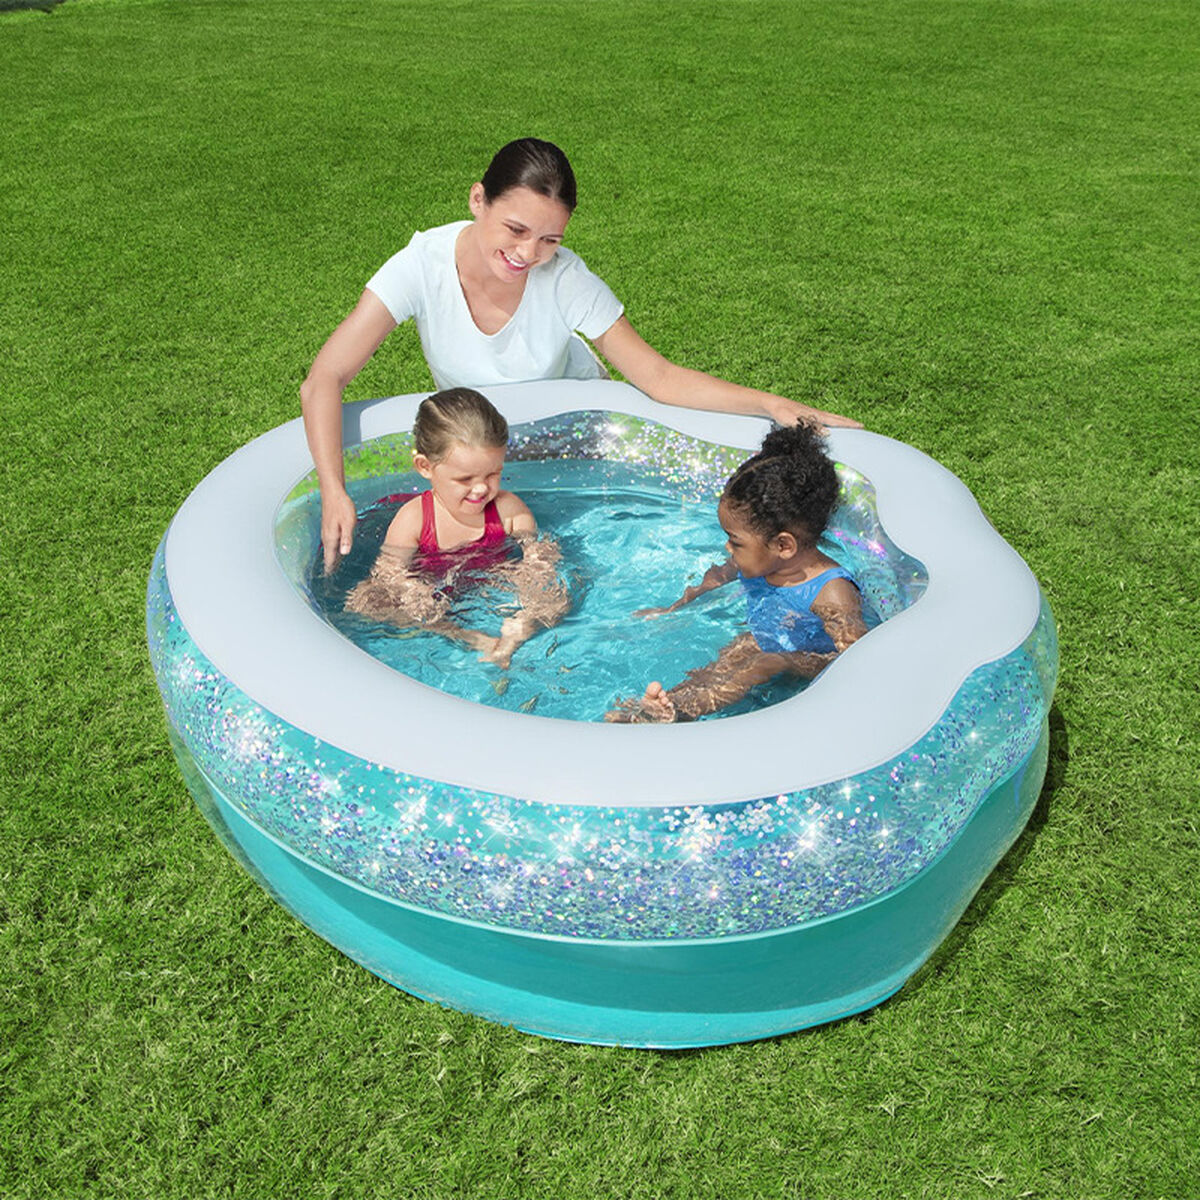 Inflatable Paddling Pool for Children Bestway 150 x 125 x 43 cm